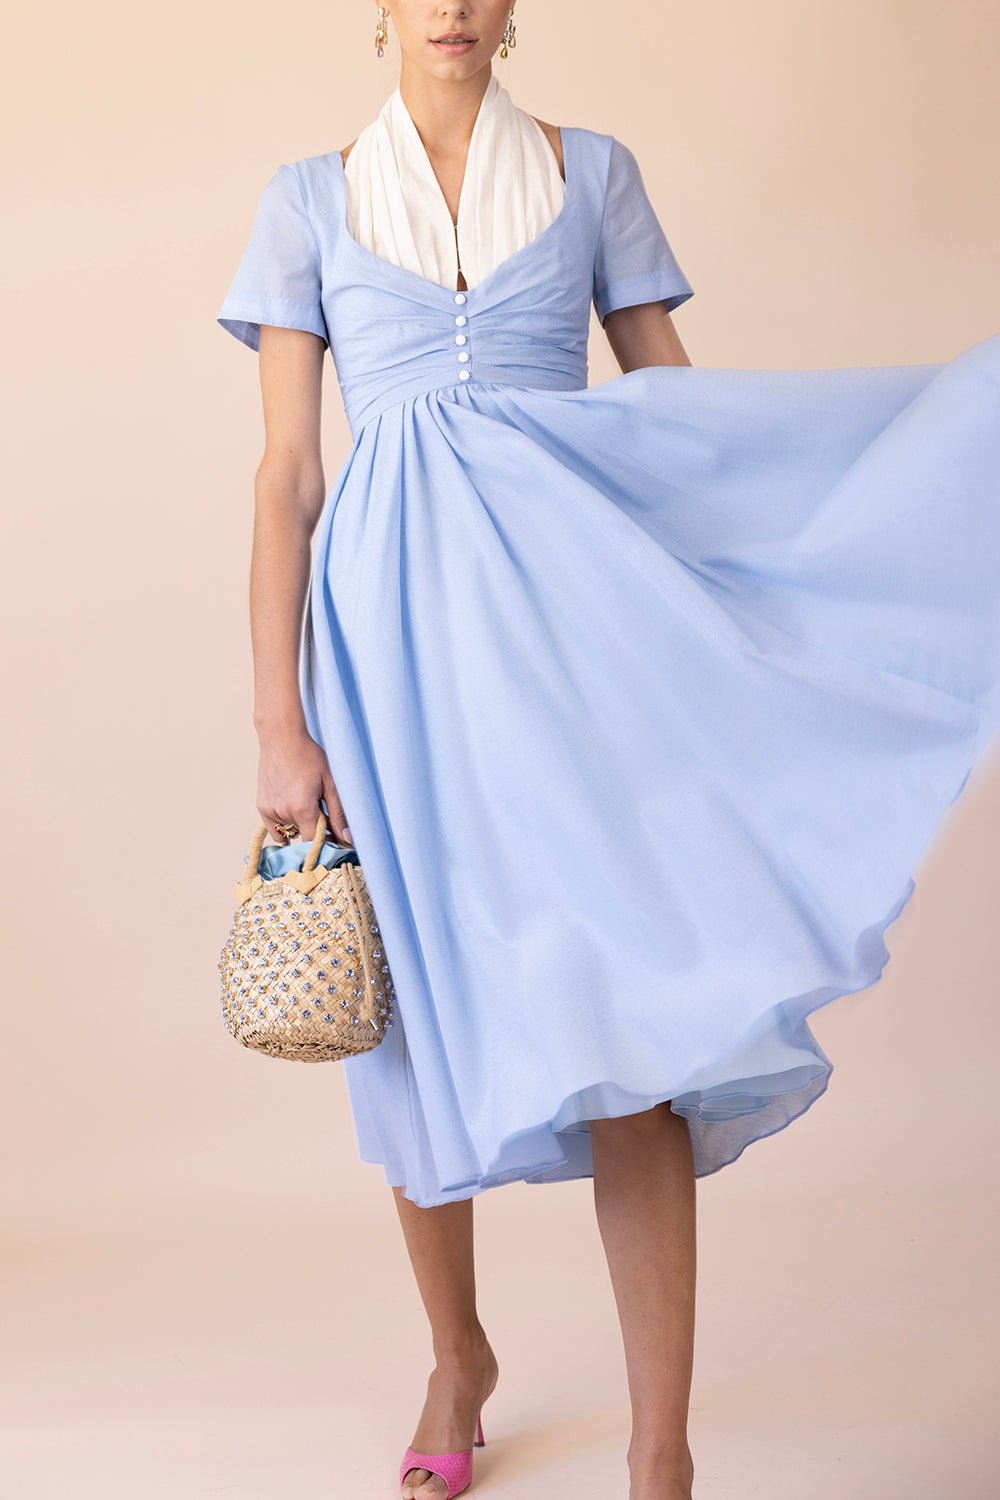 All Tucked In Halter Dress CLOTHINGDRESSCASUAL ROSIE ASSOULIN   